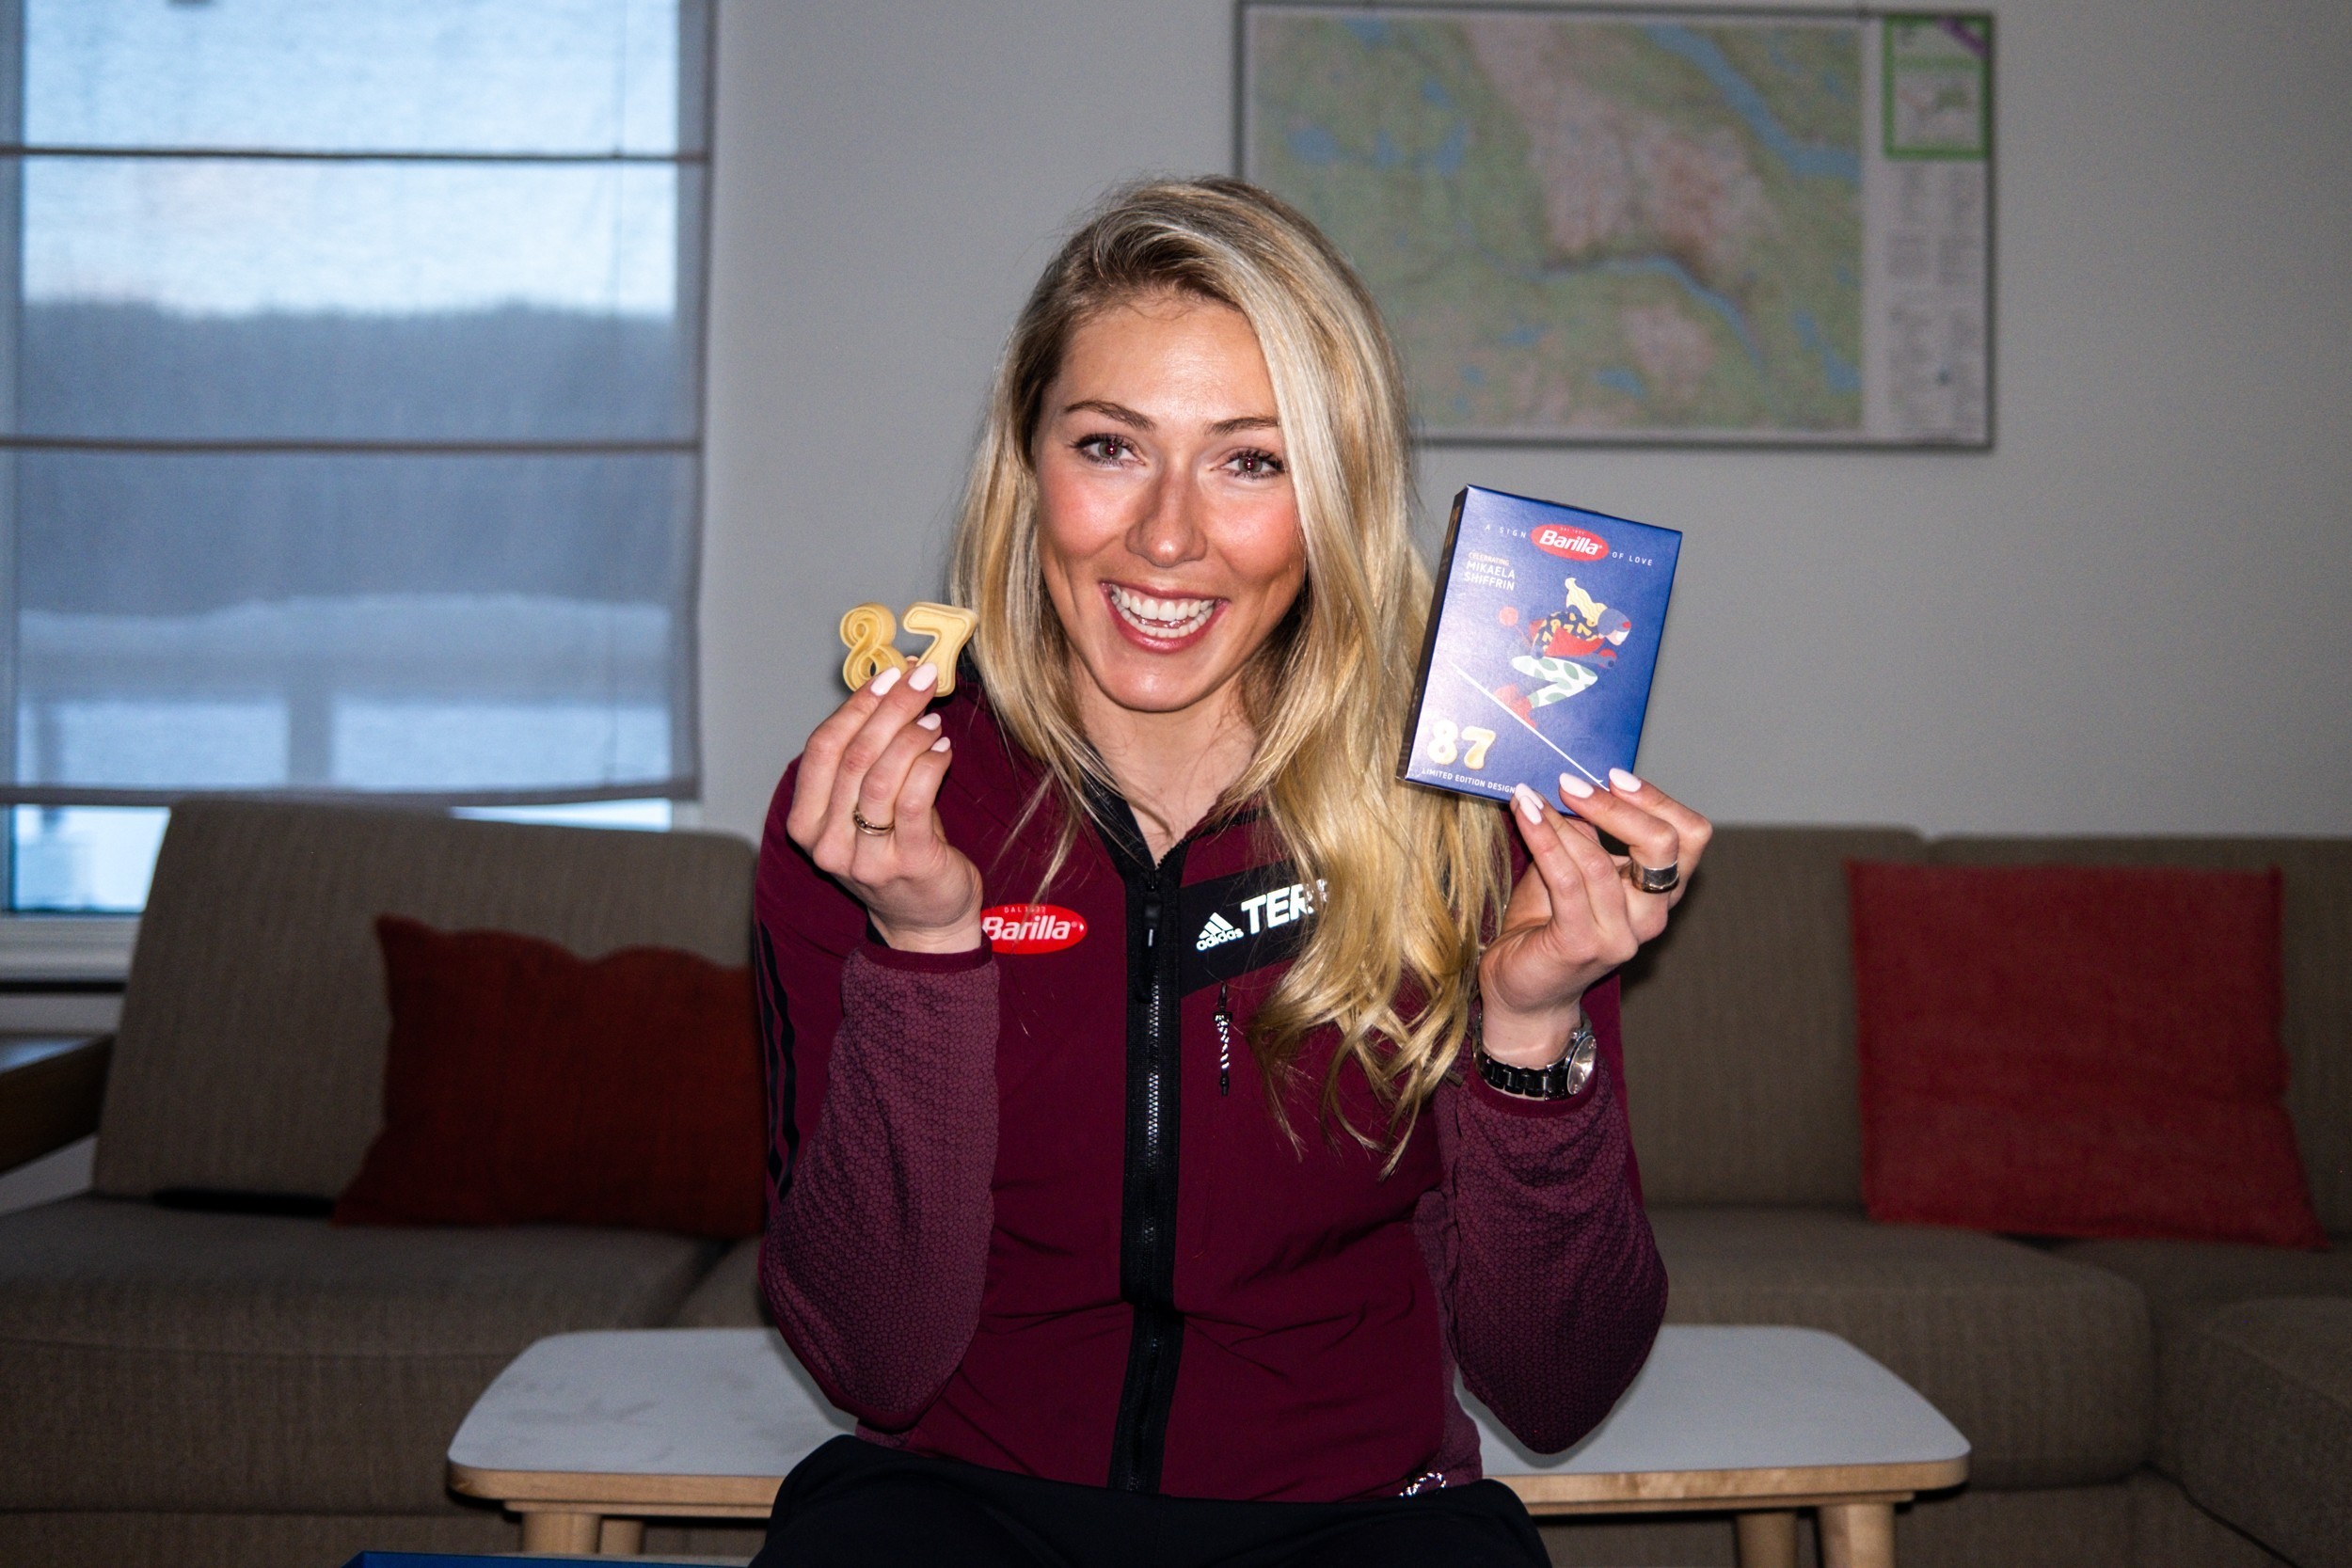 Barilla & Mikaela Shiffrin: Greatness starts with a great recipe - Pack No. 35